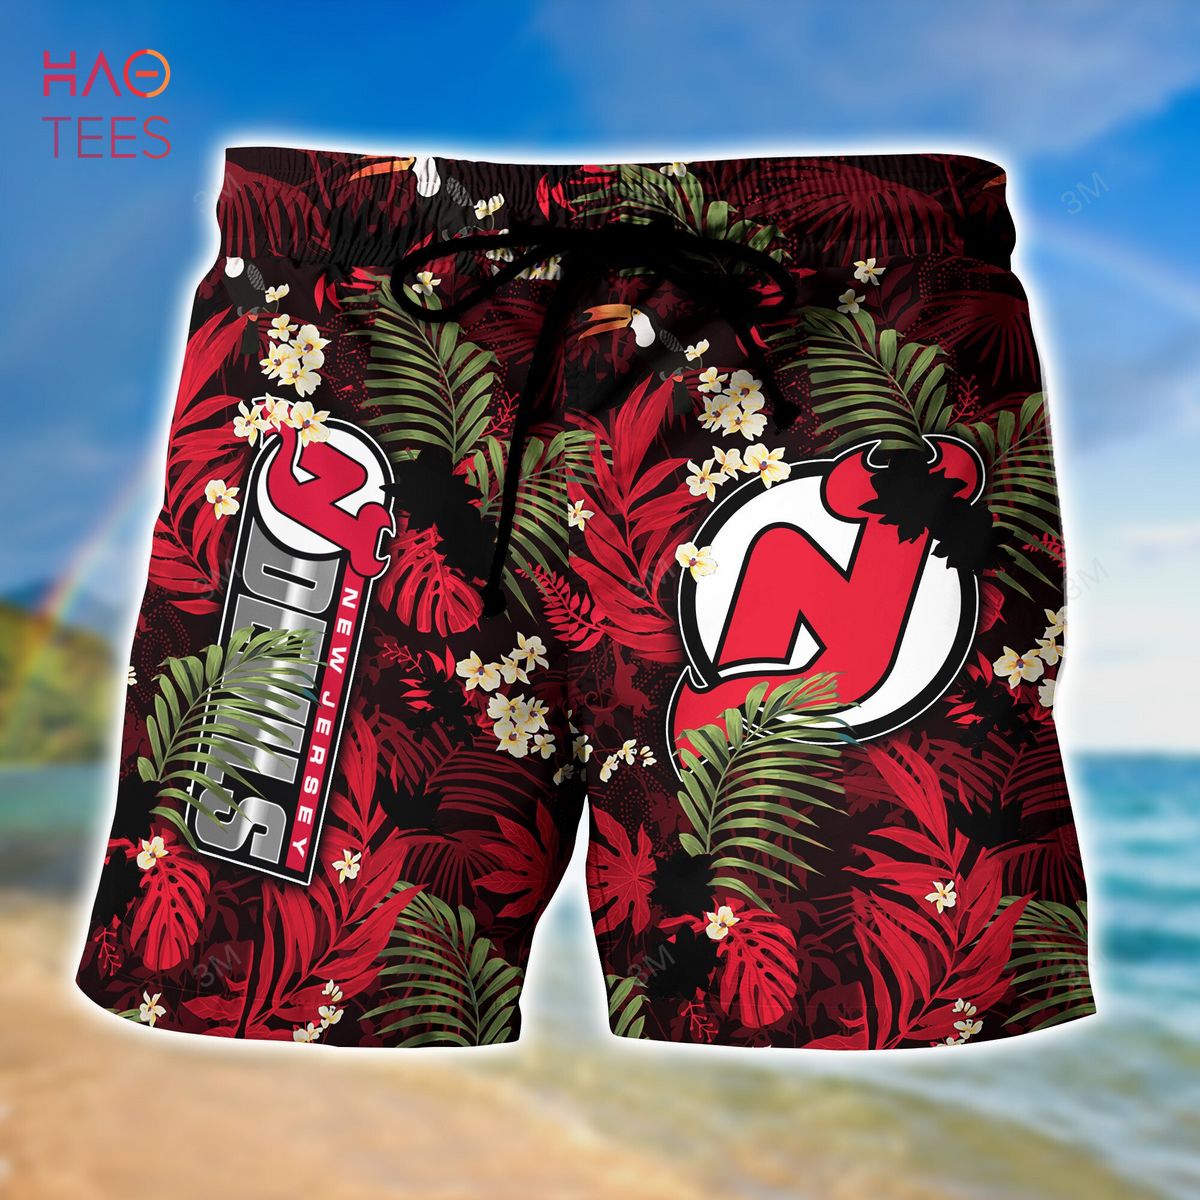 Sublimated Basketball Jersey Devils style